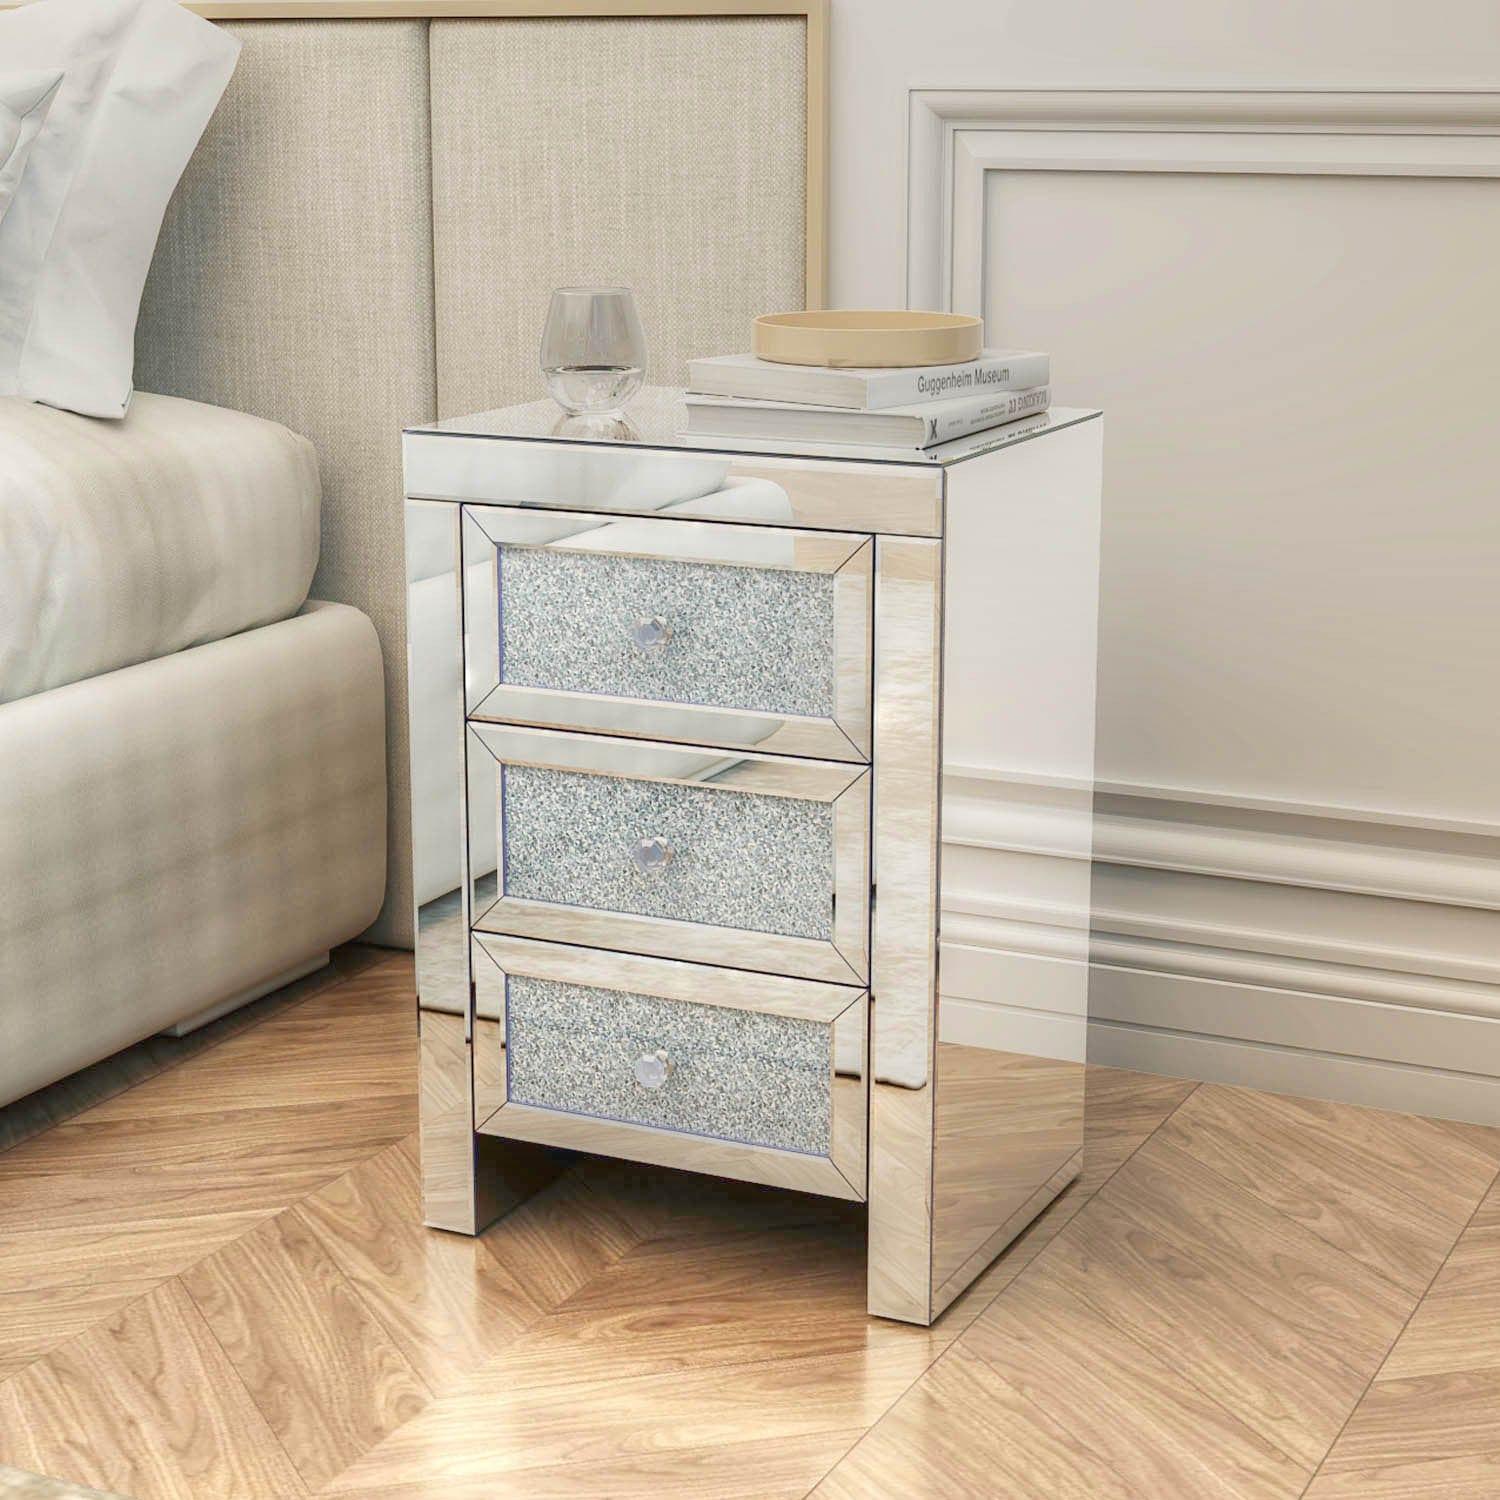 Shop Mirrored Nightstand, Silver Bedside Tables, Mirrored End Table Side Table for Bedroom Living Room Mademoiselle Home Decor